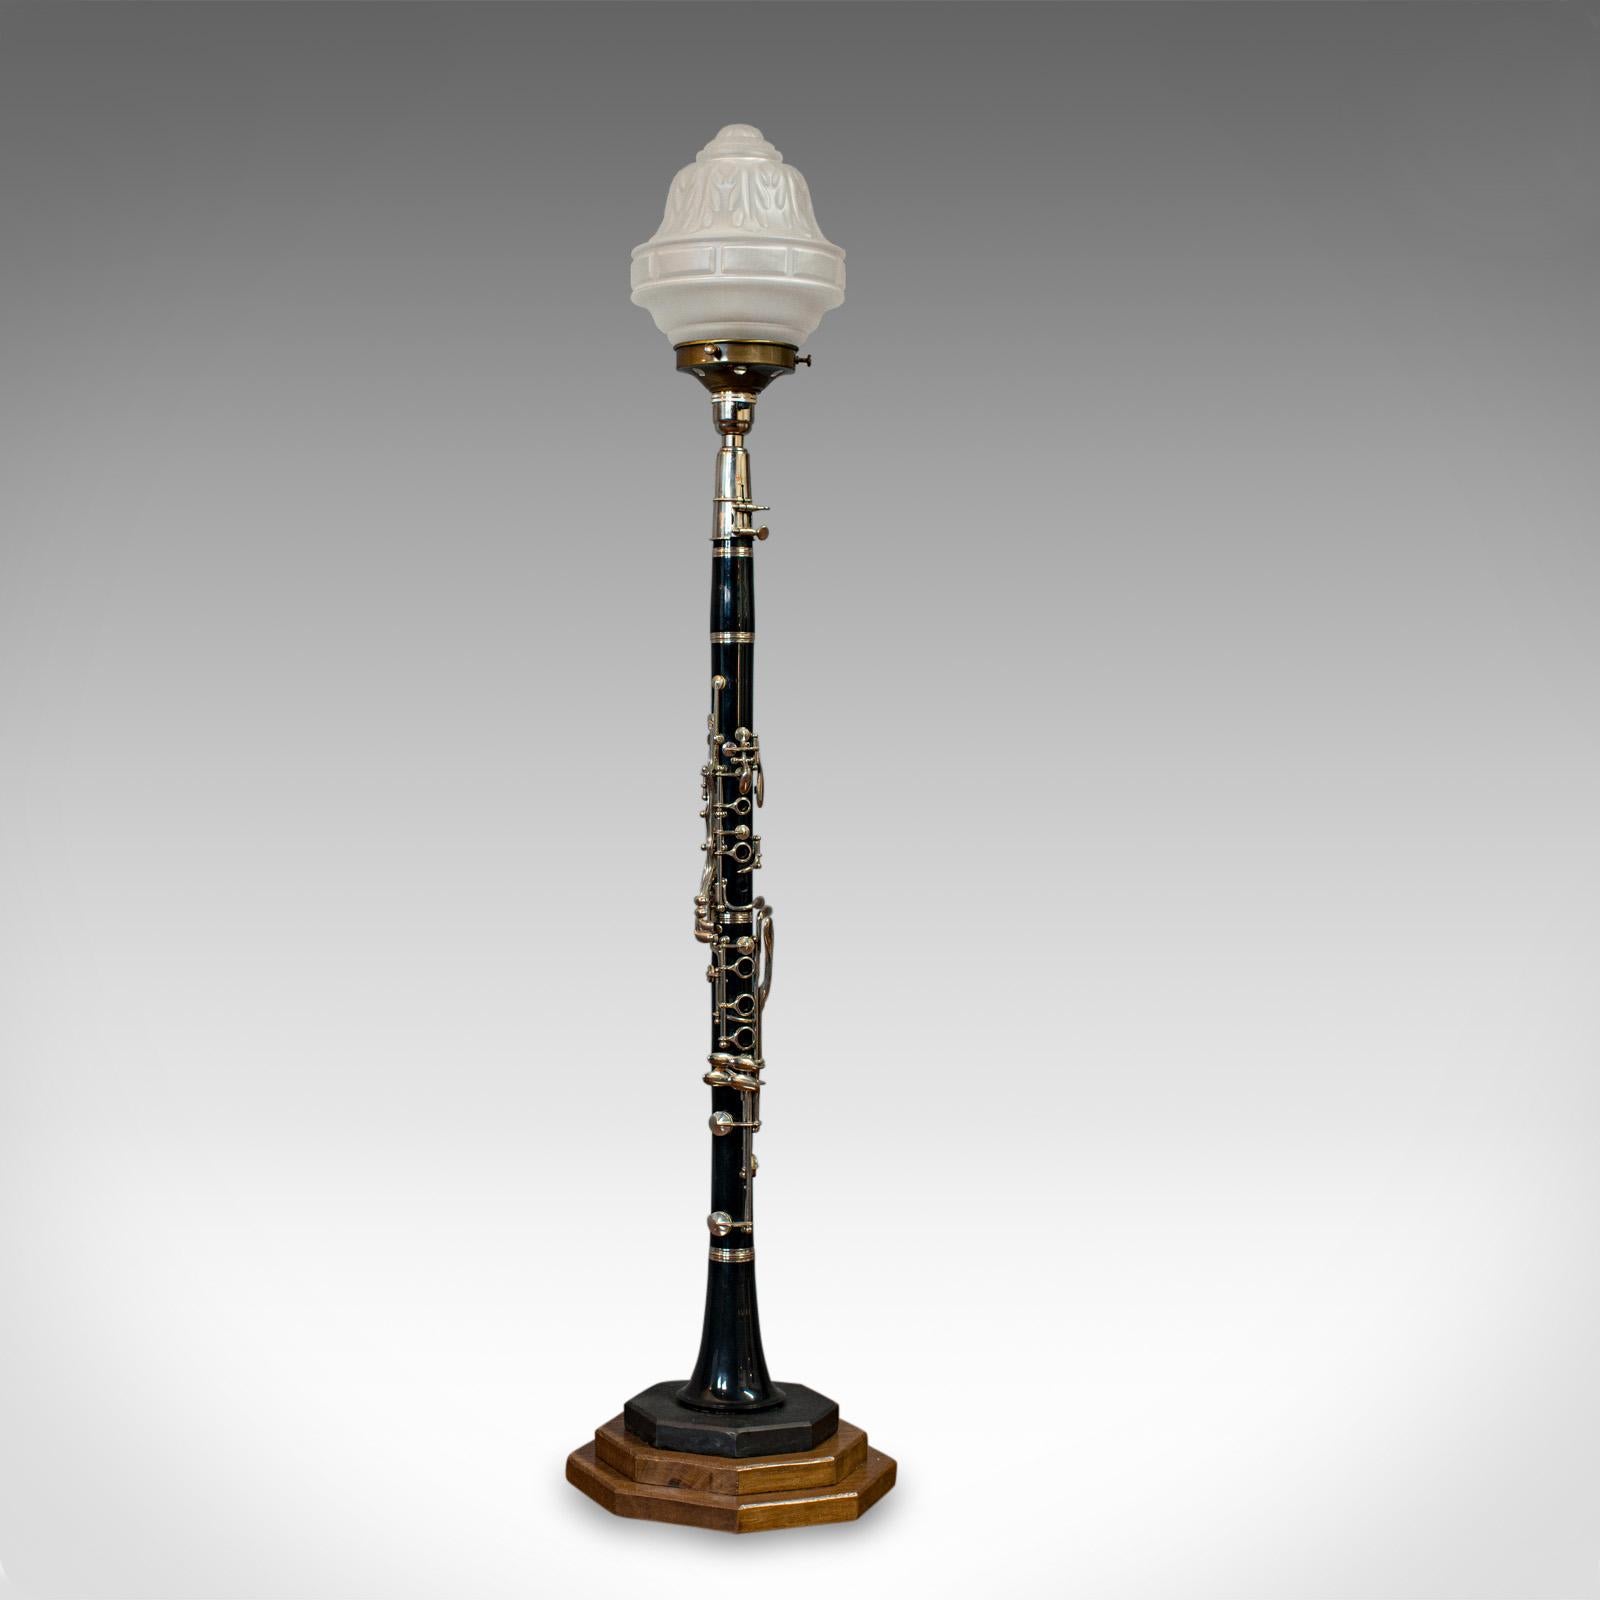 This is a vintage clarinet lamp. A bespoke, handmade table light beautifully crafted from this Classic musical instrument.

In excellent condition, fully working with quality, opaque glass shade
Attractive clarinet with working metal